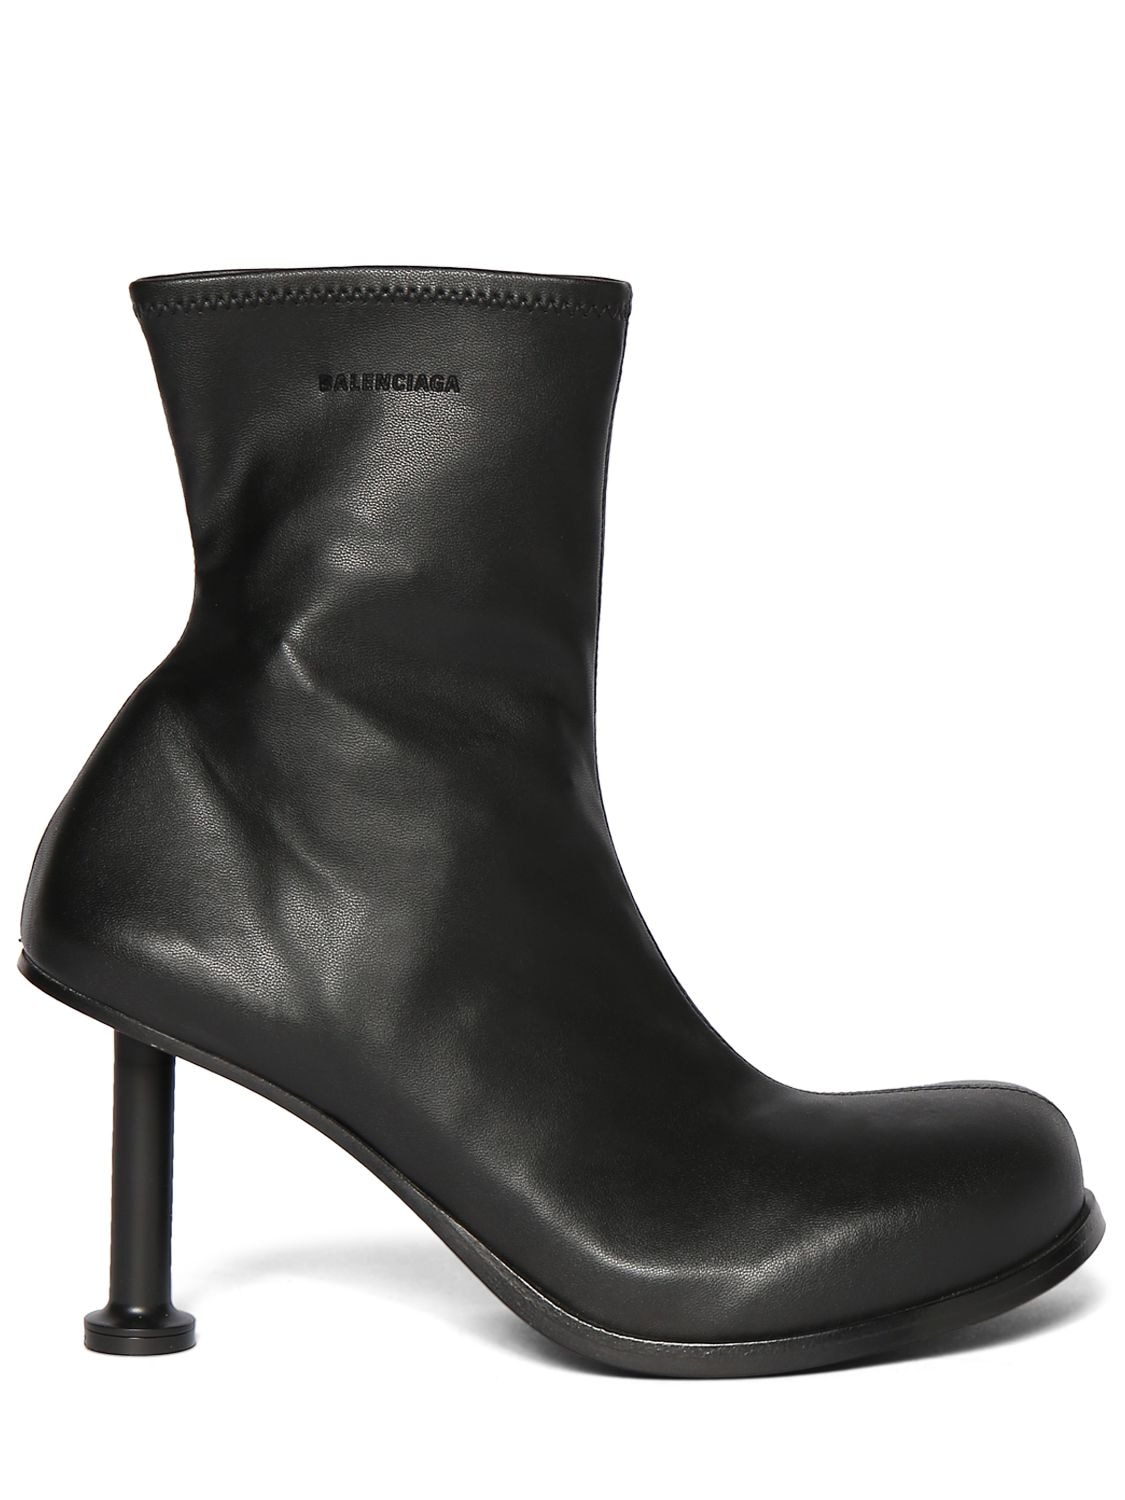 Balenciaga 80mm Mallorca Faux Leather Ankle Boots In Black